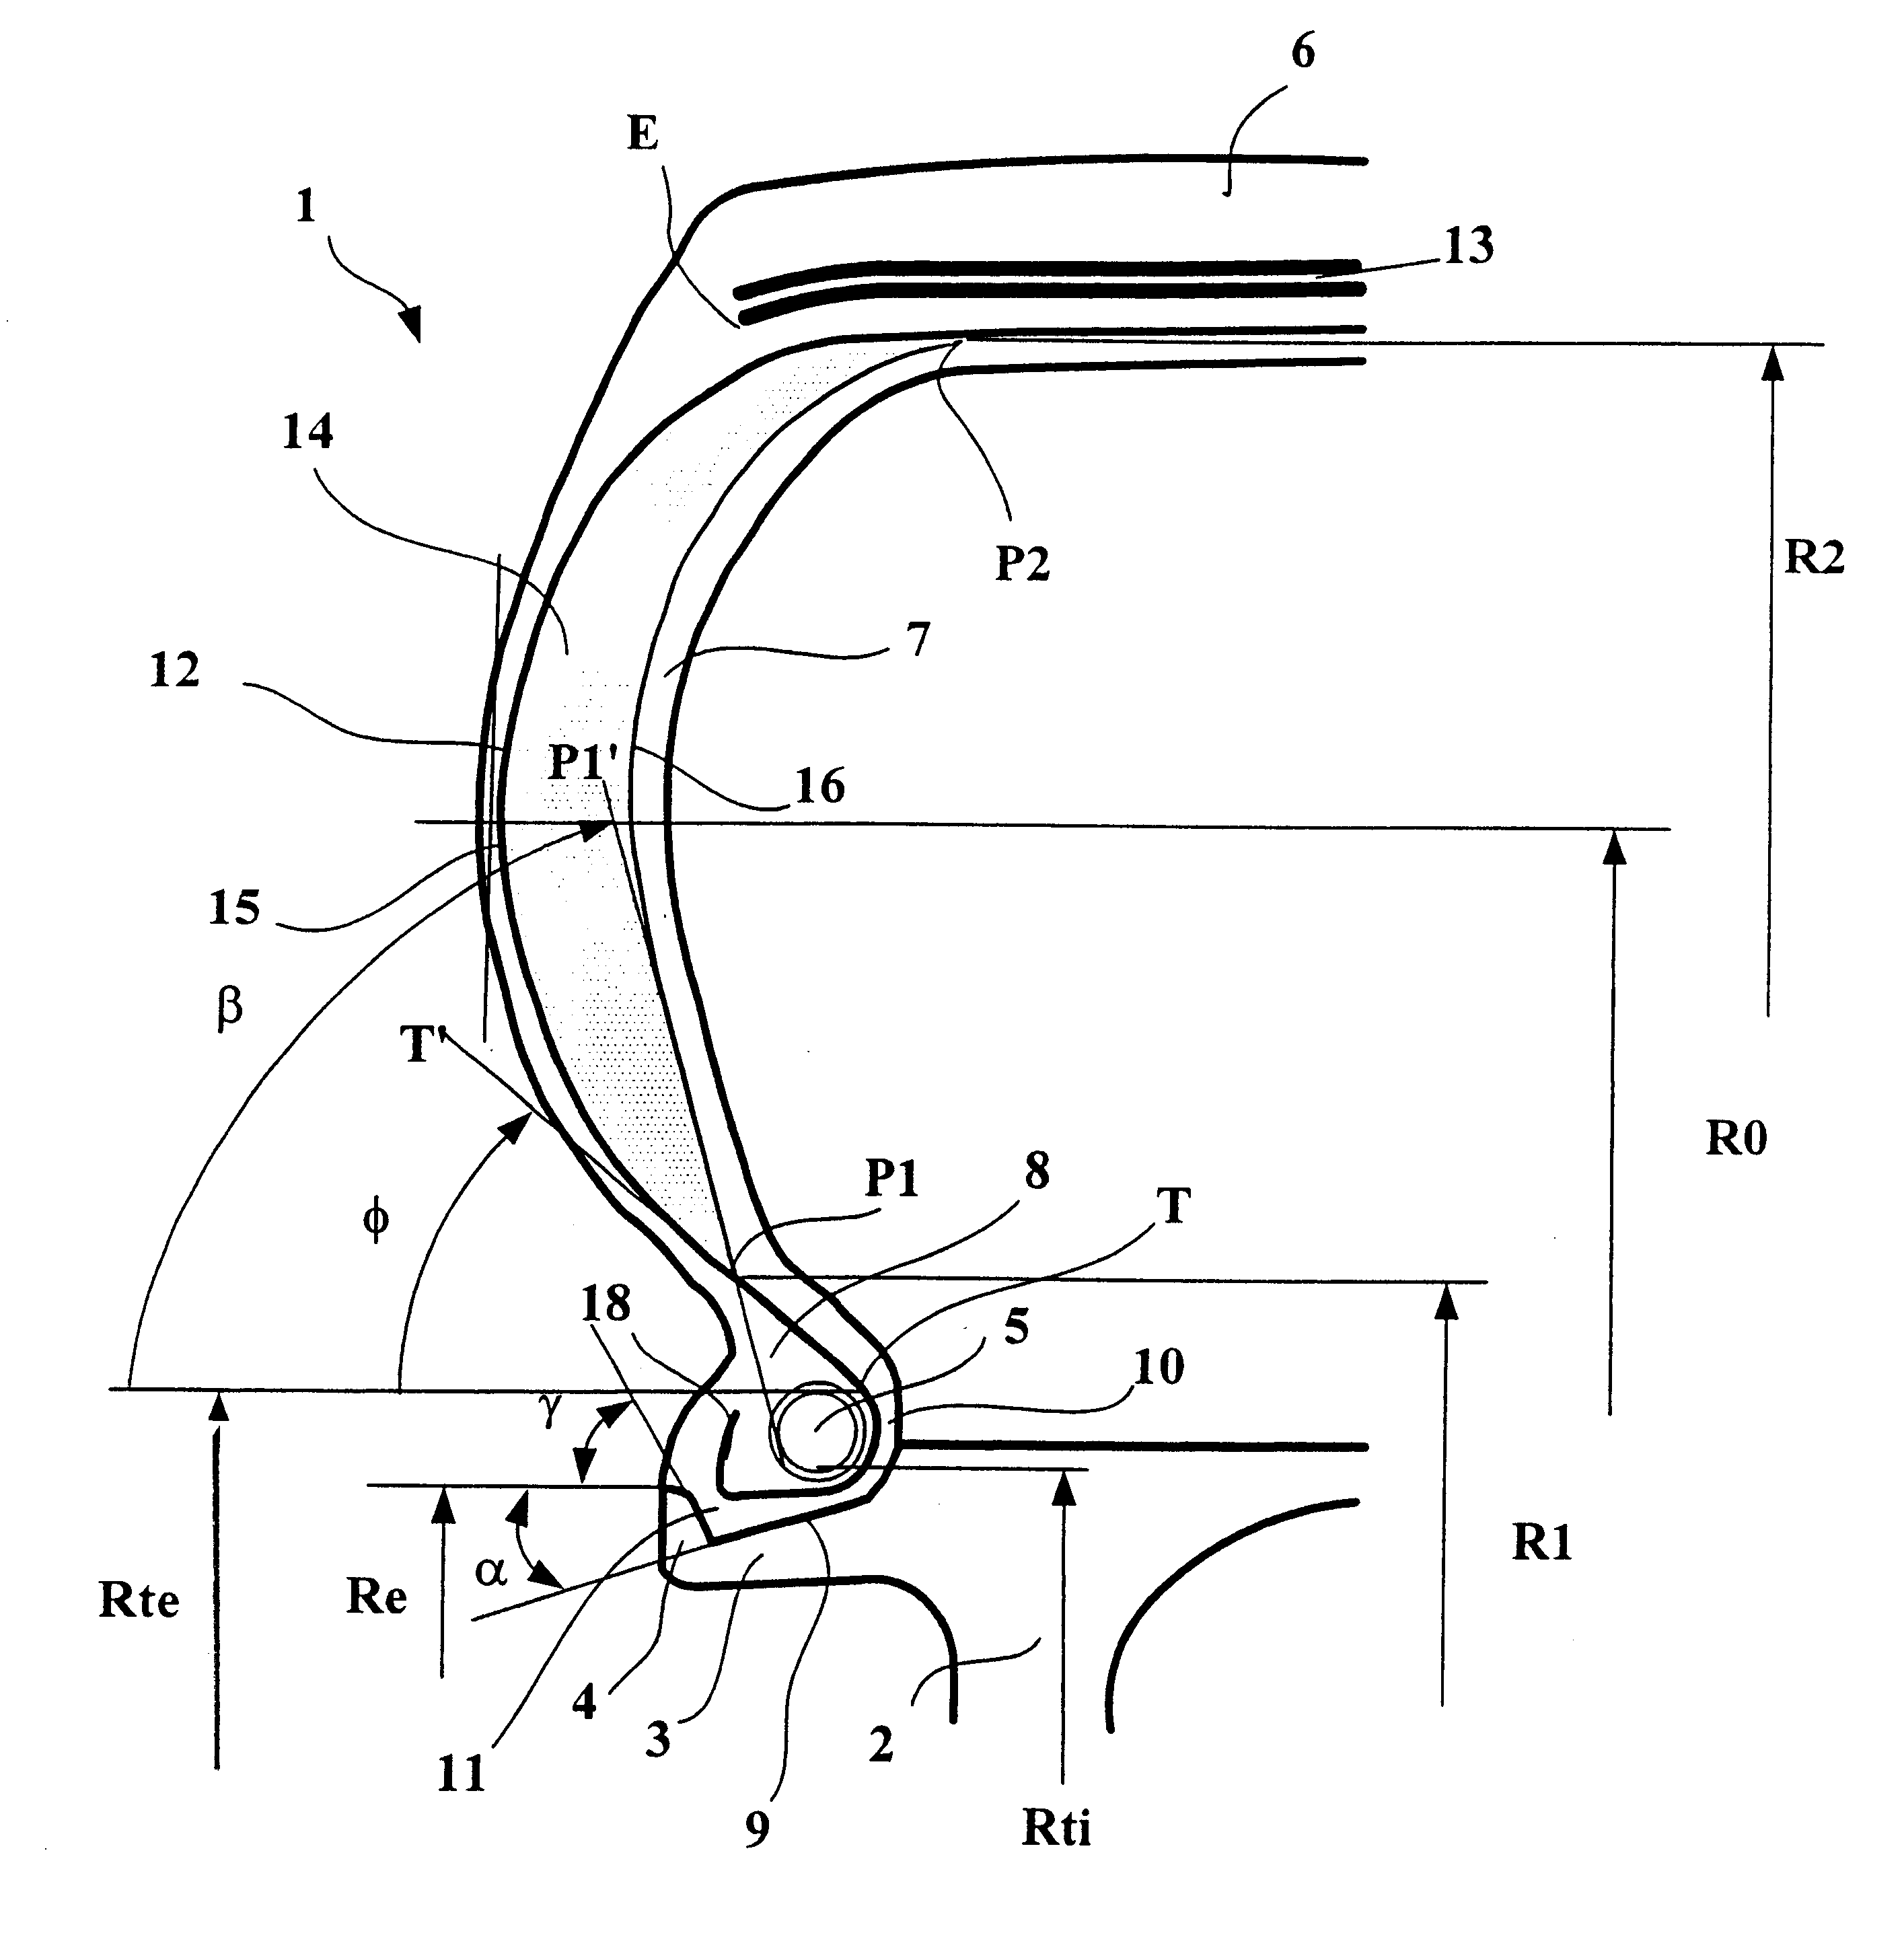 Tire comprising a reinforcing profiled element in at least one sidewall, and tire/rim assembly comprising such a tire